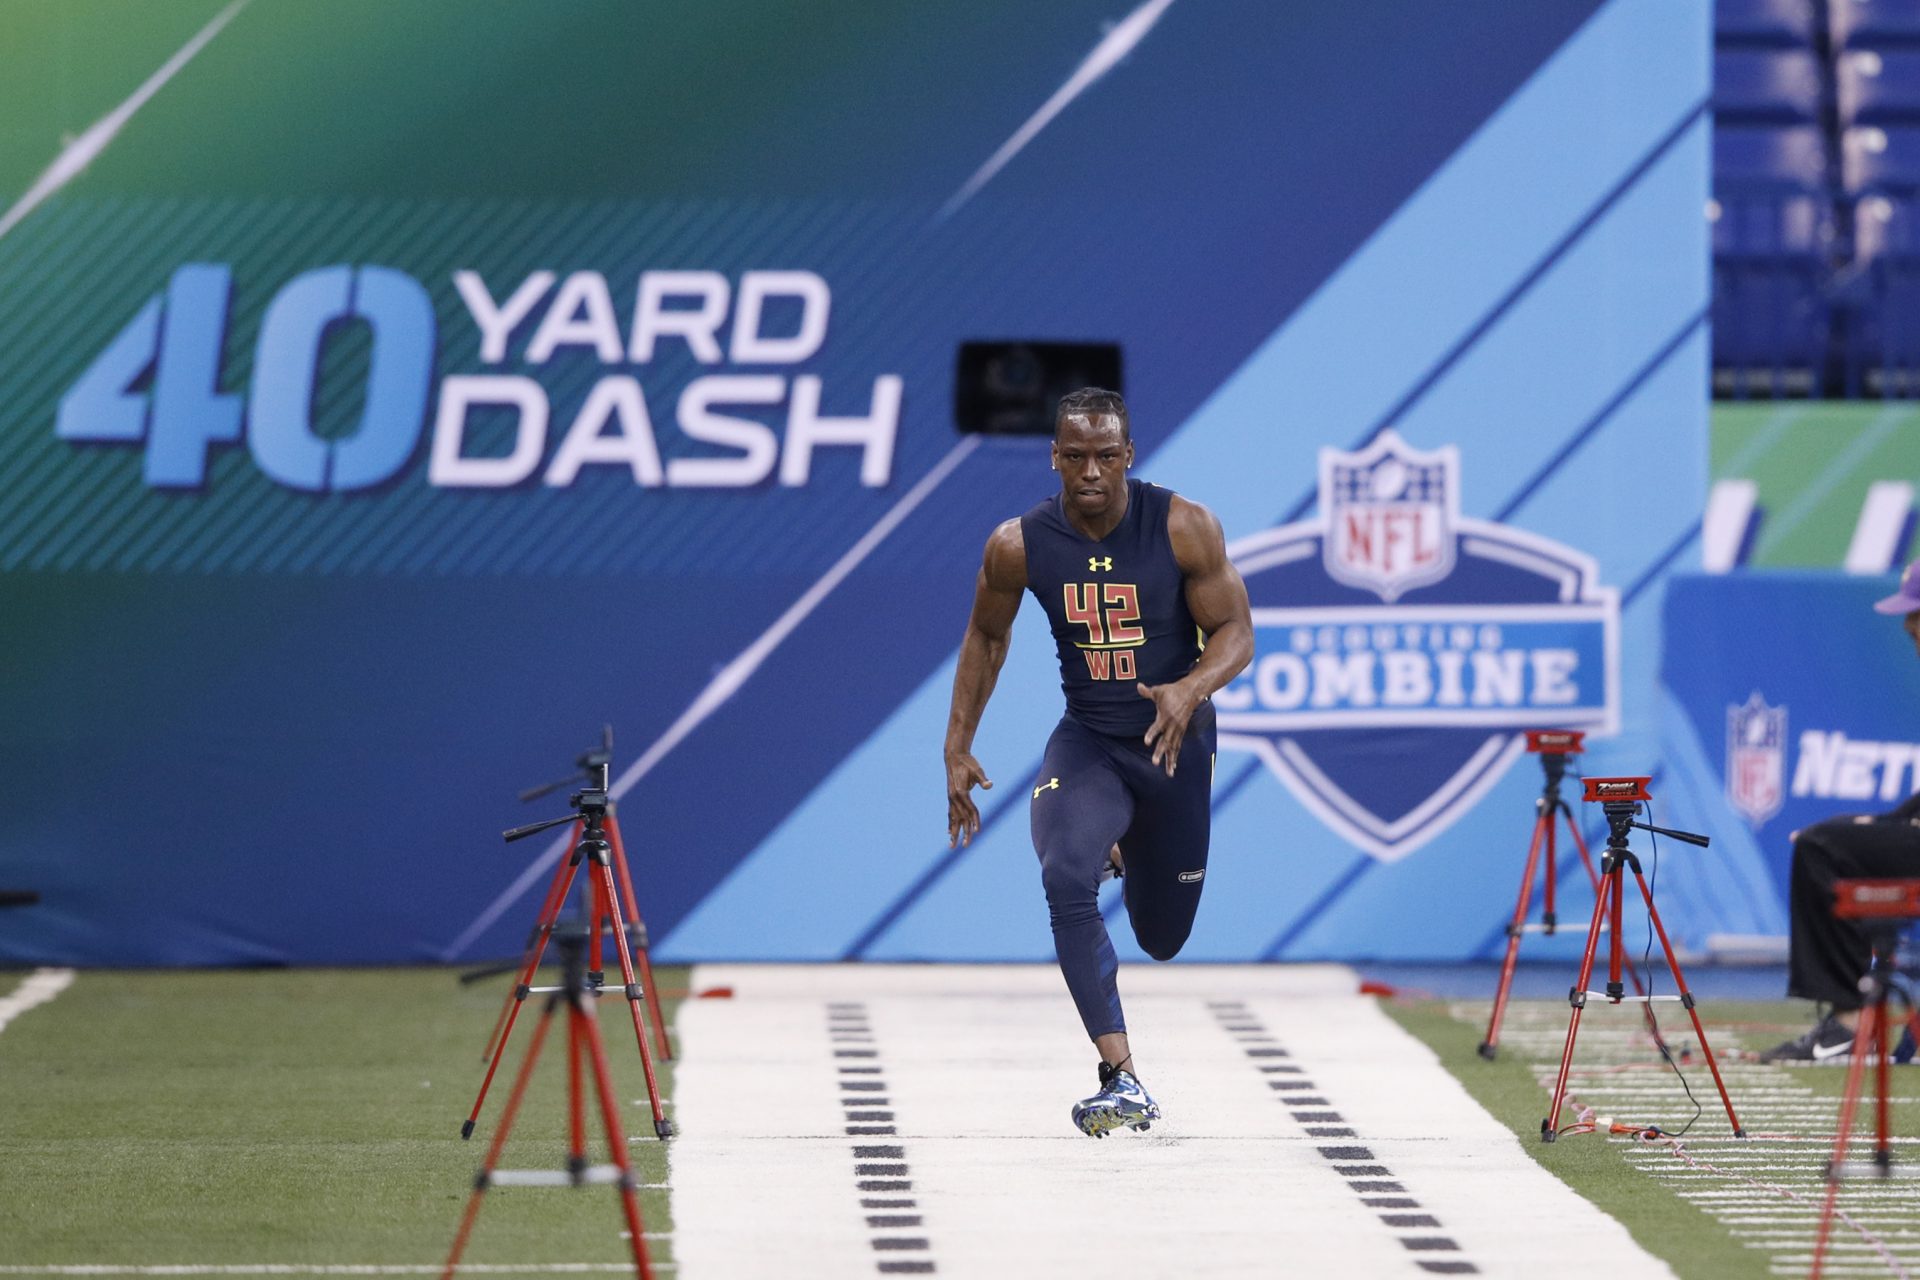 NFL Scouting Combine, the greatest performances ever